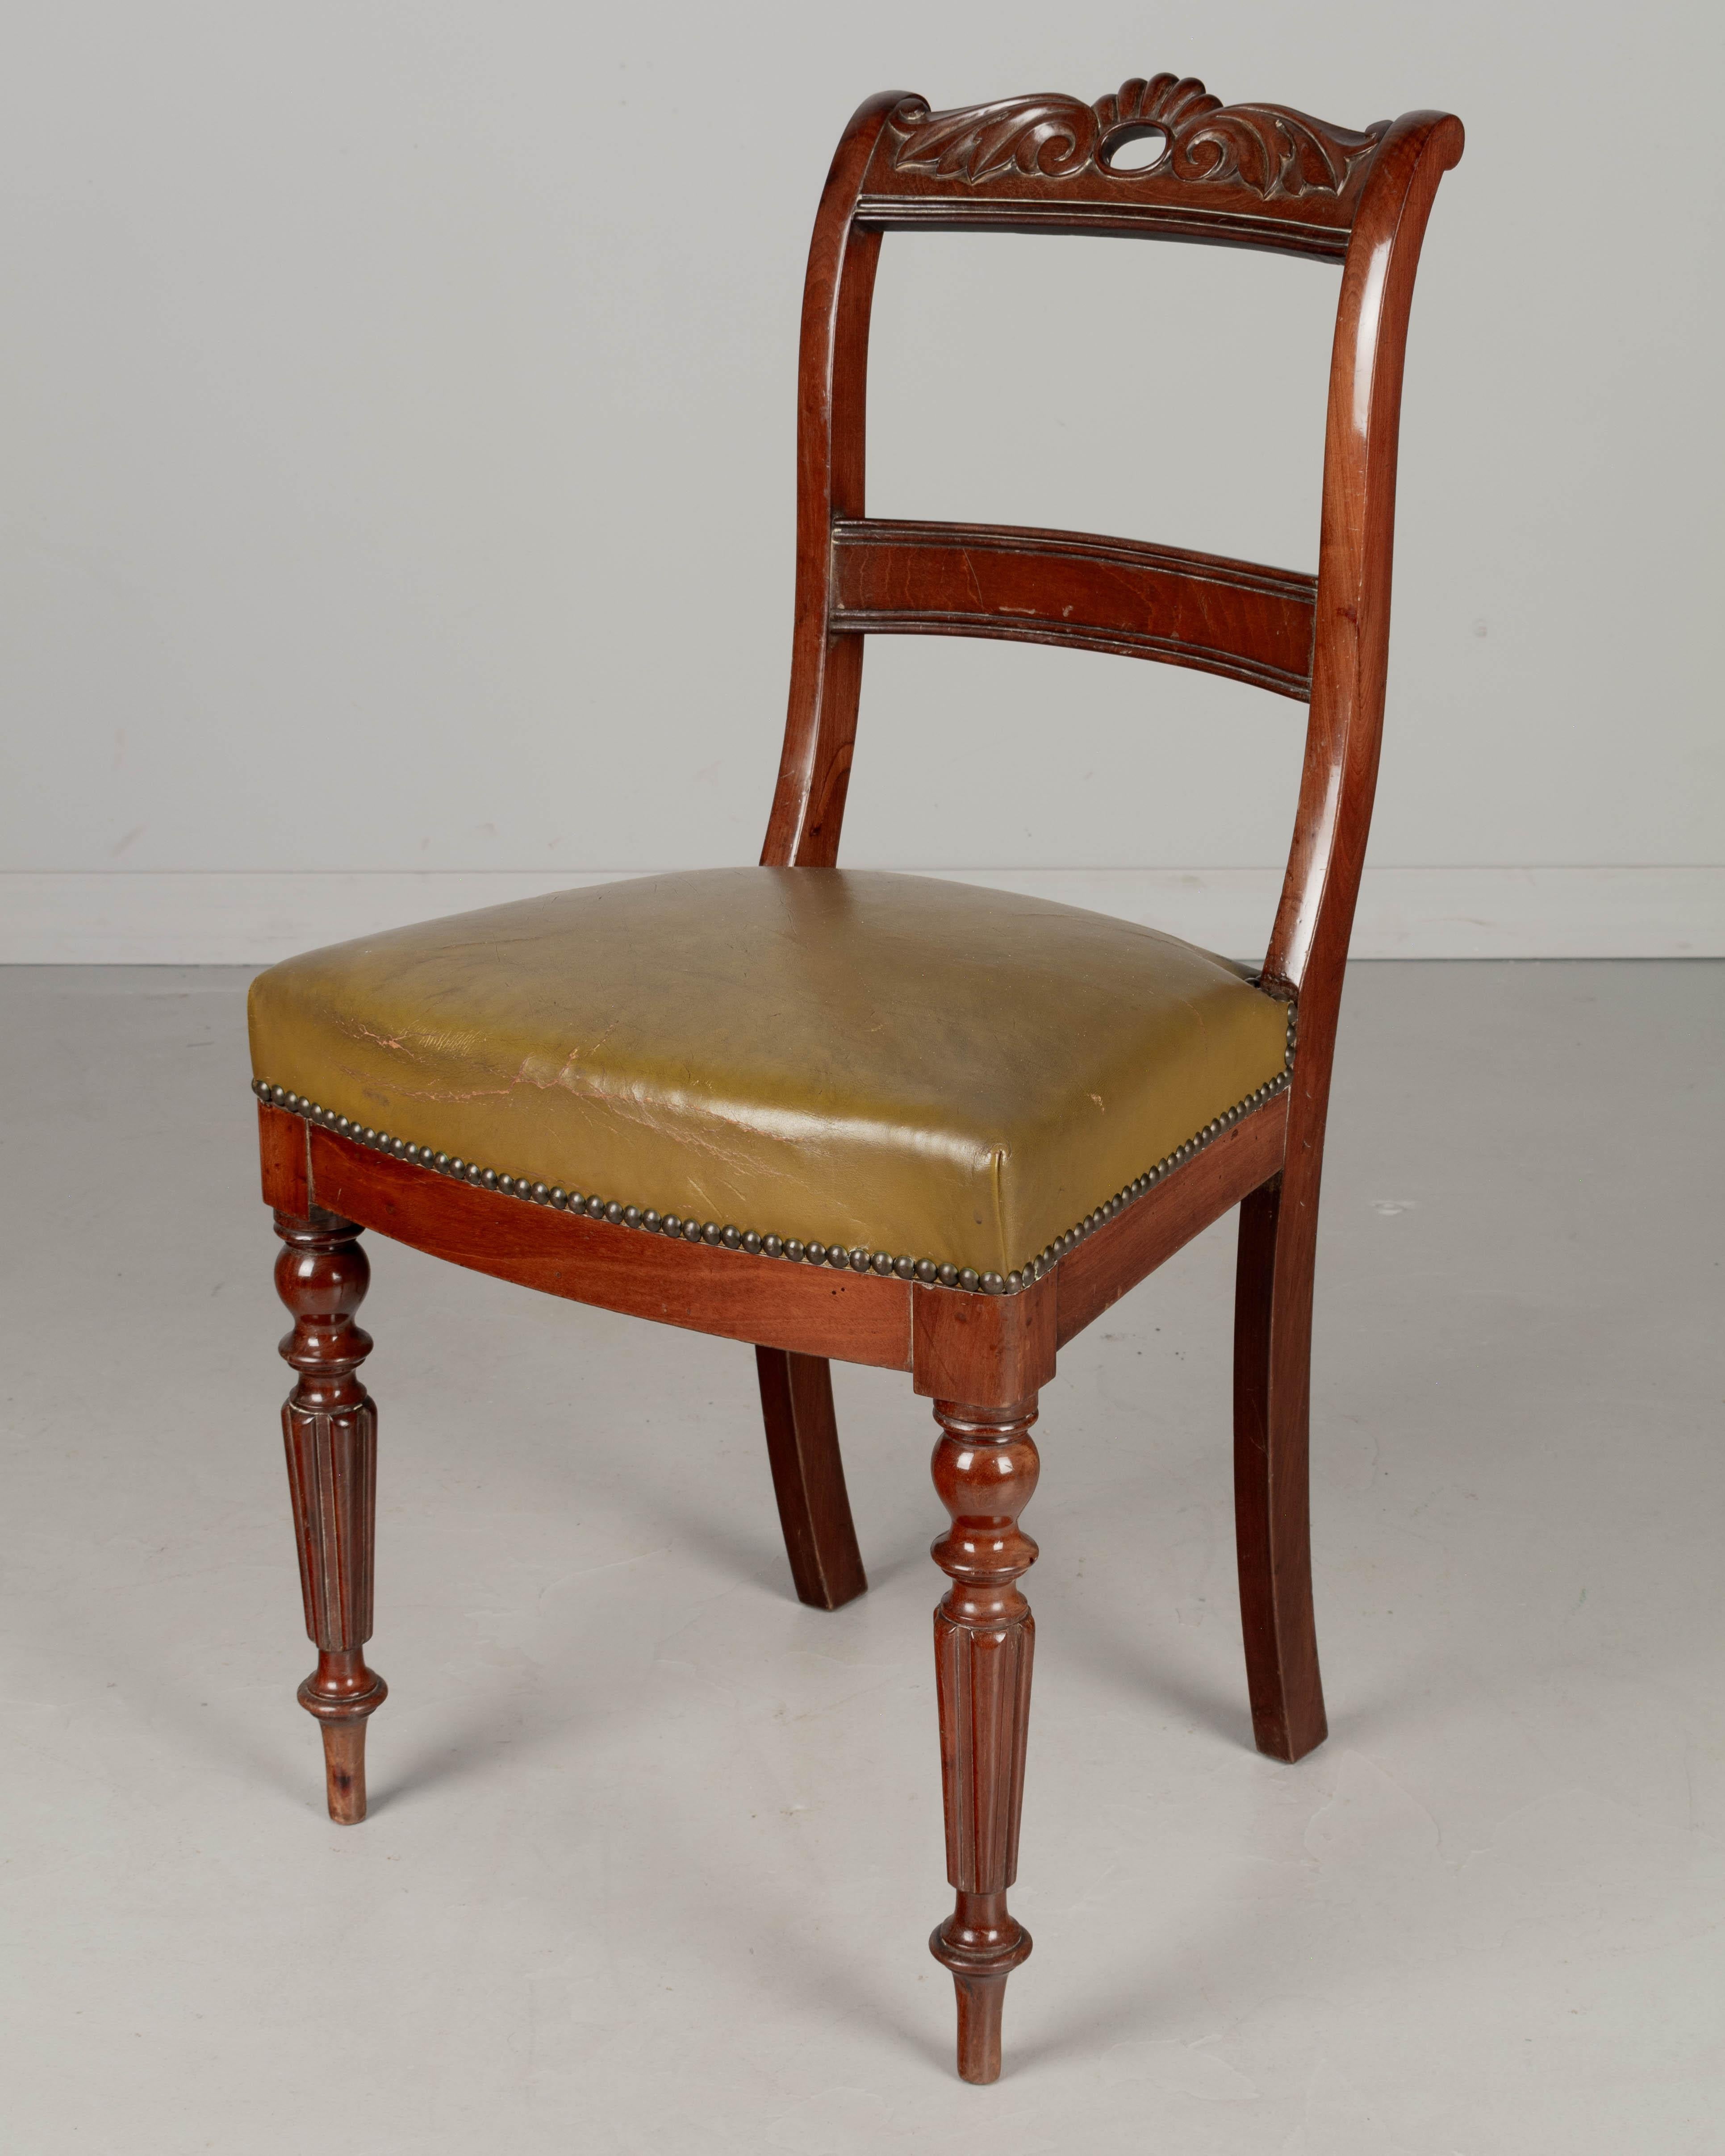 Hand-Crafted English Regency Style Mahogany Chairs, Set of 8 For Sale